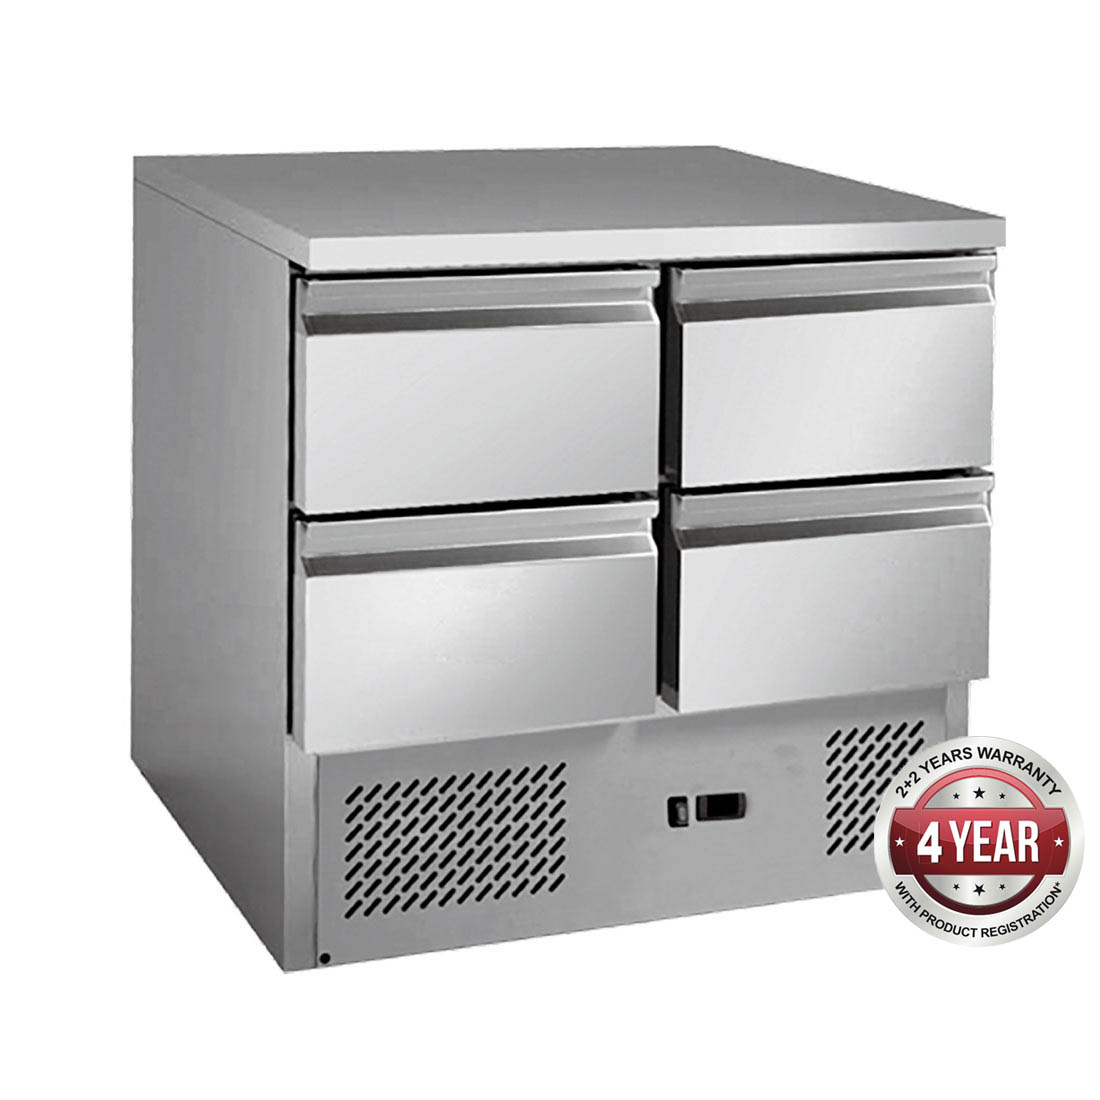 Stainless steel 4 Drawers Benchtop Fridge - GNS900-4D